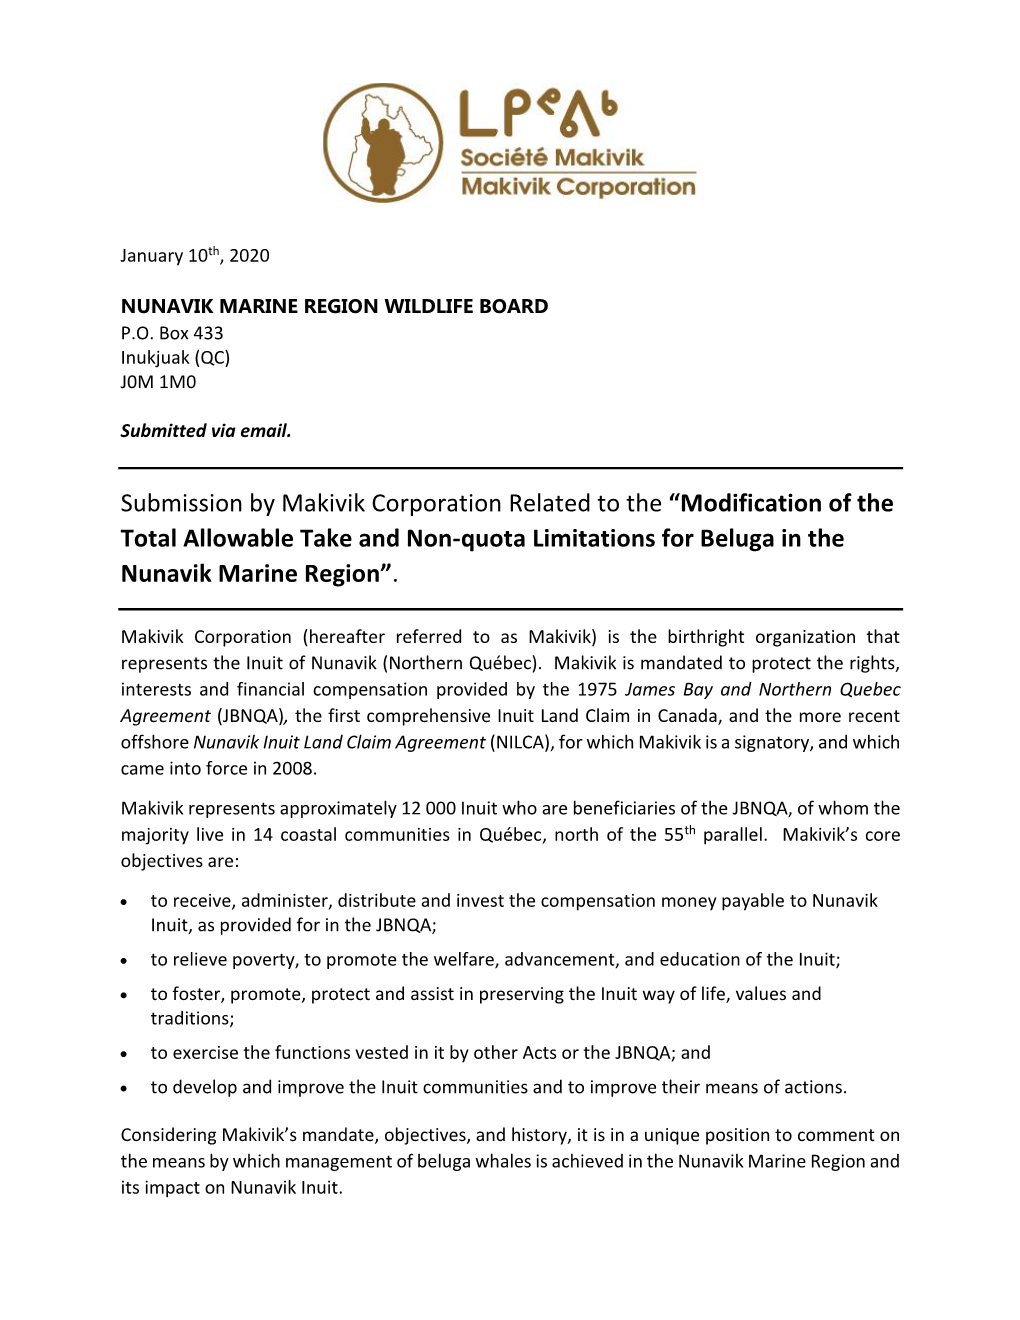 Submission by Makivik Corporation Related to the “Modification of the Total Allowable Take and Non-Quota Limitations for Beluga in the Nunavik Marine Region”